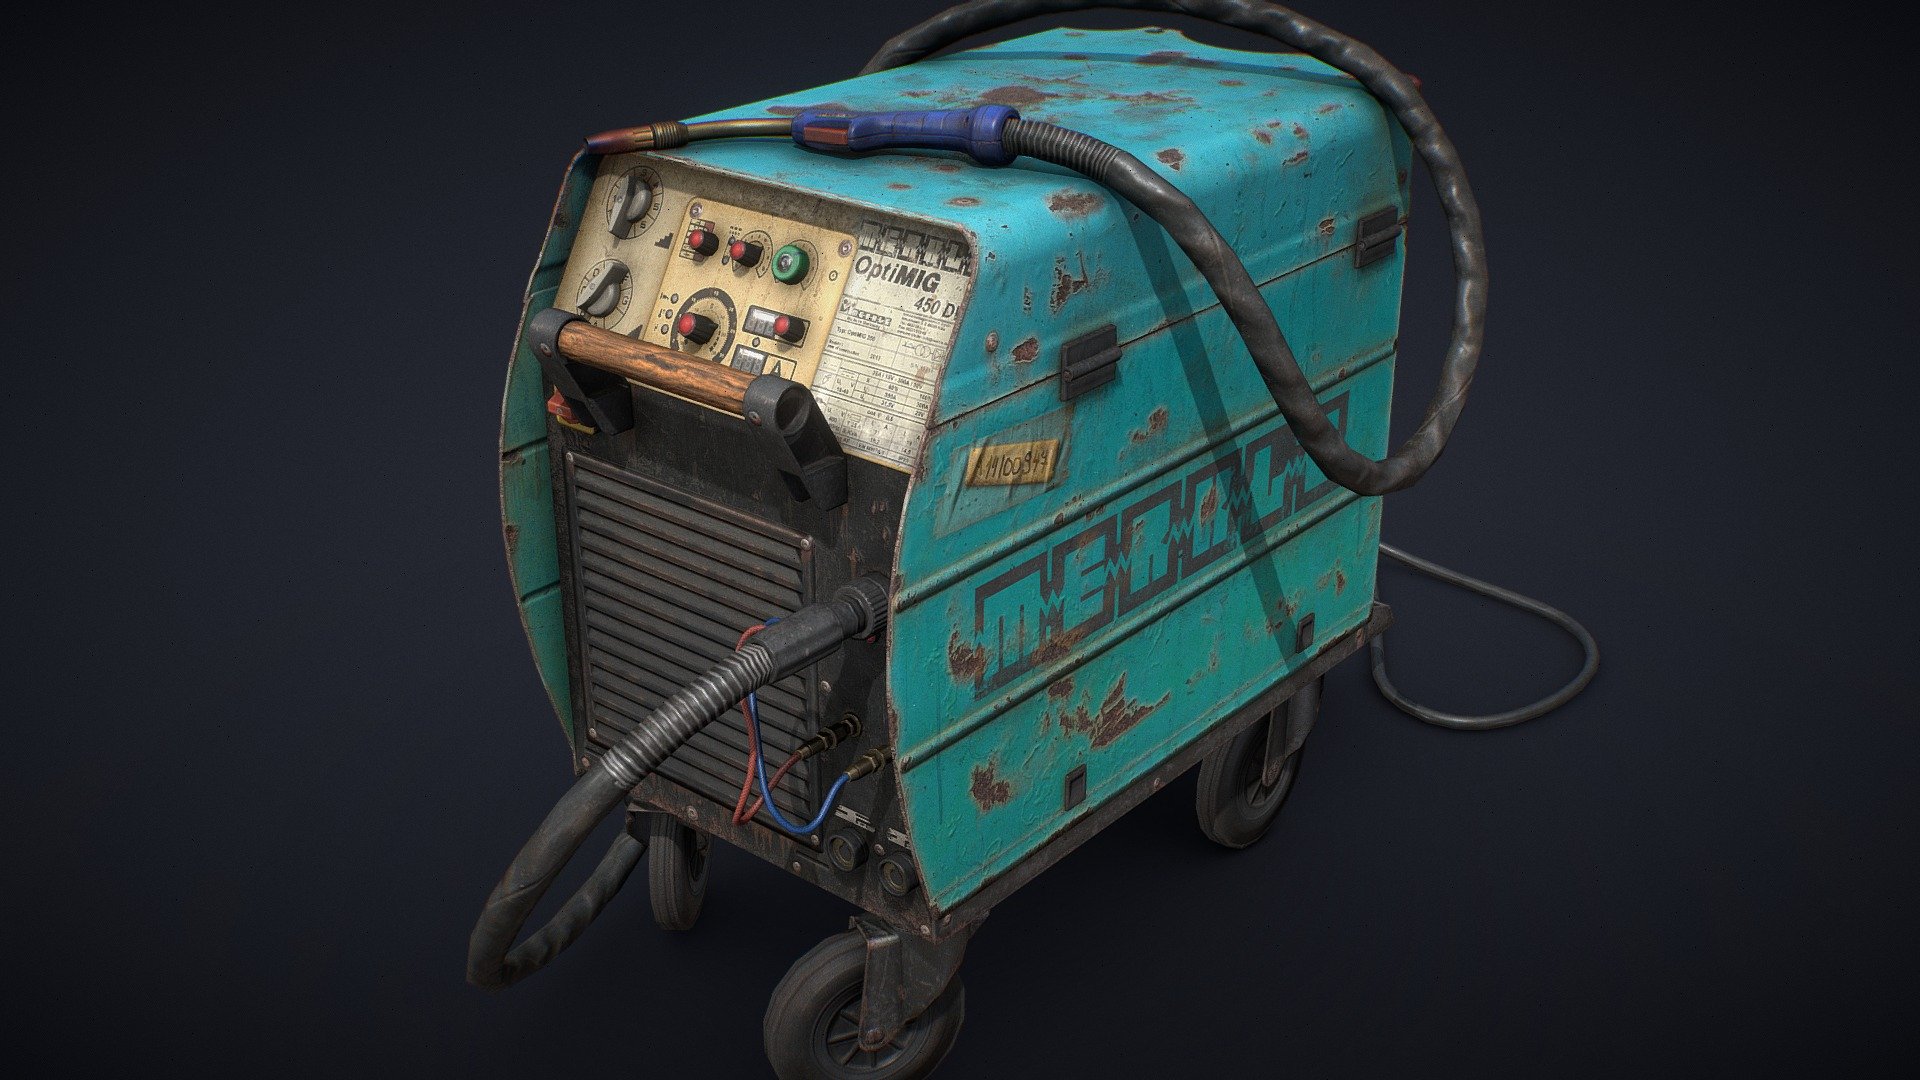 Merkle OptiMIG 450|Welding machine

Can be used like game prop in Unity, UE4 etc. Has PBR Metalness texture set.

Additional files contains:
Five texture maps (Base color, Metalness, Roughness, Normal, AO. (size 2048x2048))
Model format .OBJ .FBX




Does not include the welding mask shown in the screenshot - Merkle OptiMIG 450|Welding machine - Buy Royalty Free 3D model by Fayruso 3d model